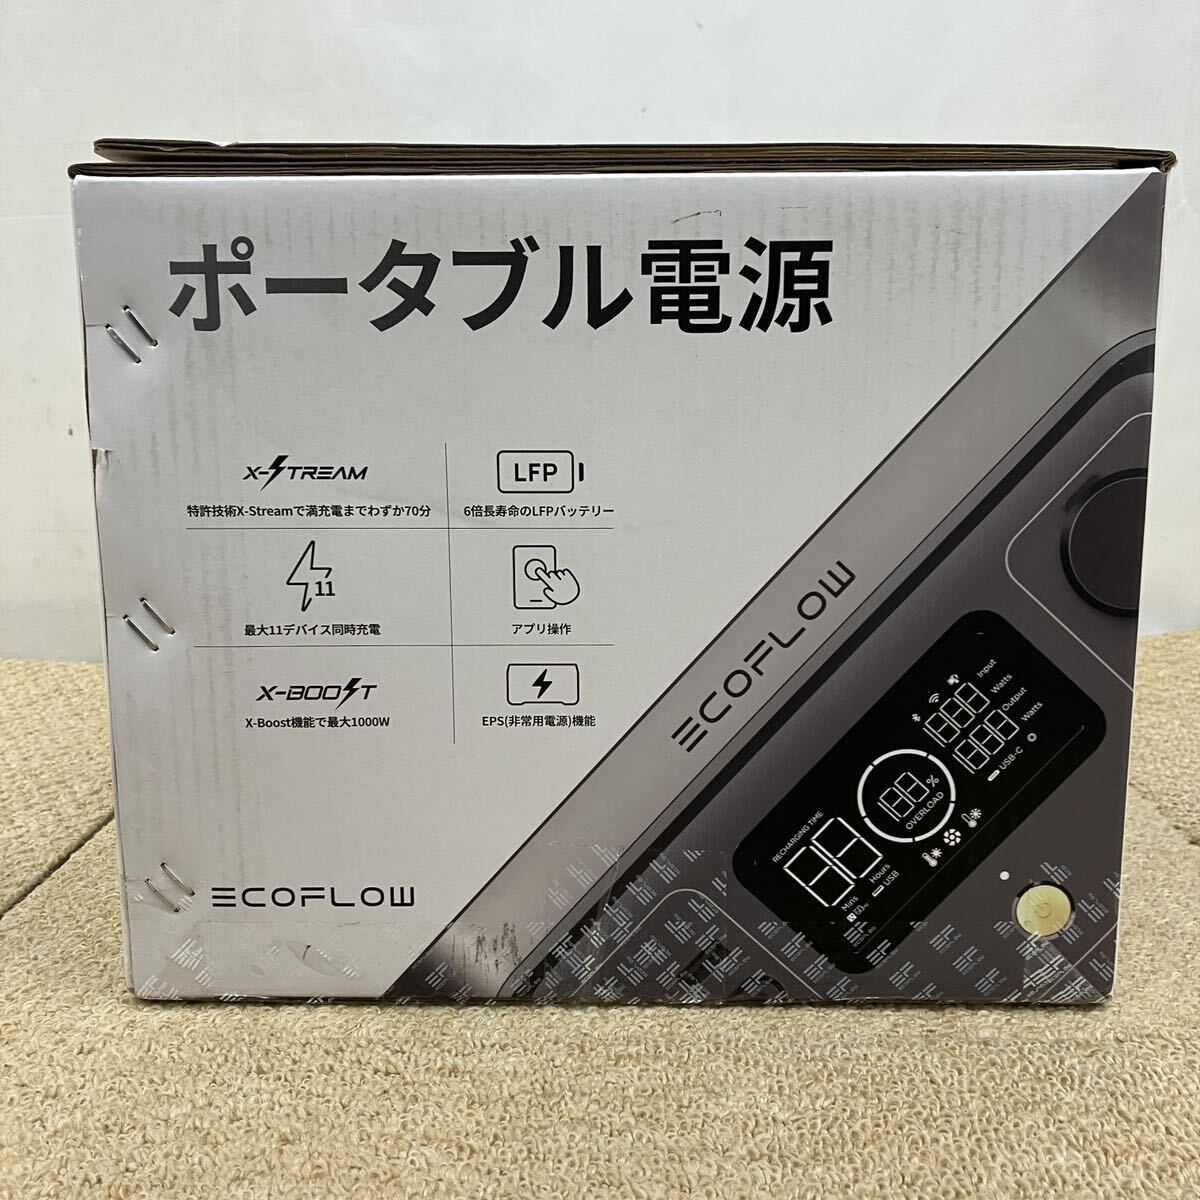 &[ selling out ] unopened!ECOFLOW eko flow RIVER2 Pro EFR620 portable power supply LFP battery 11 device same time charge EPS function installing maximum 1000W